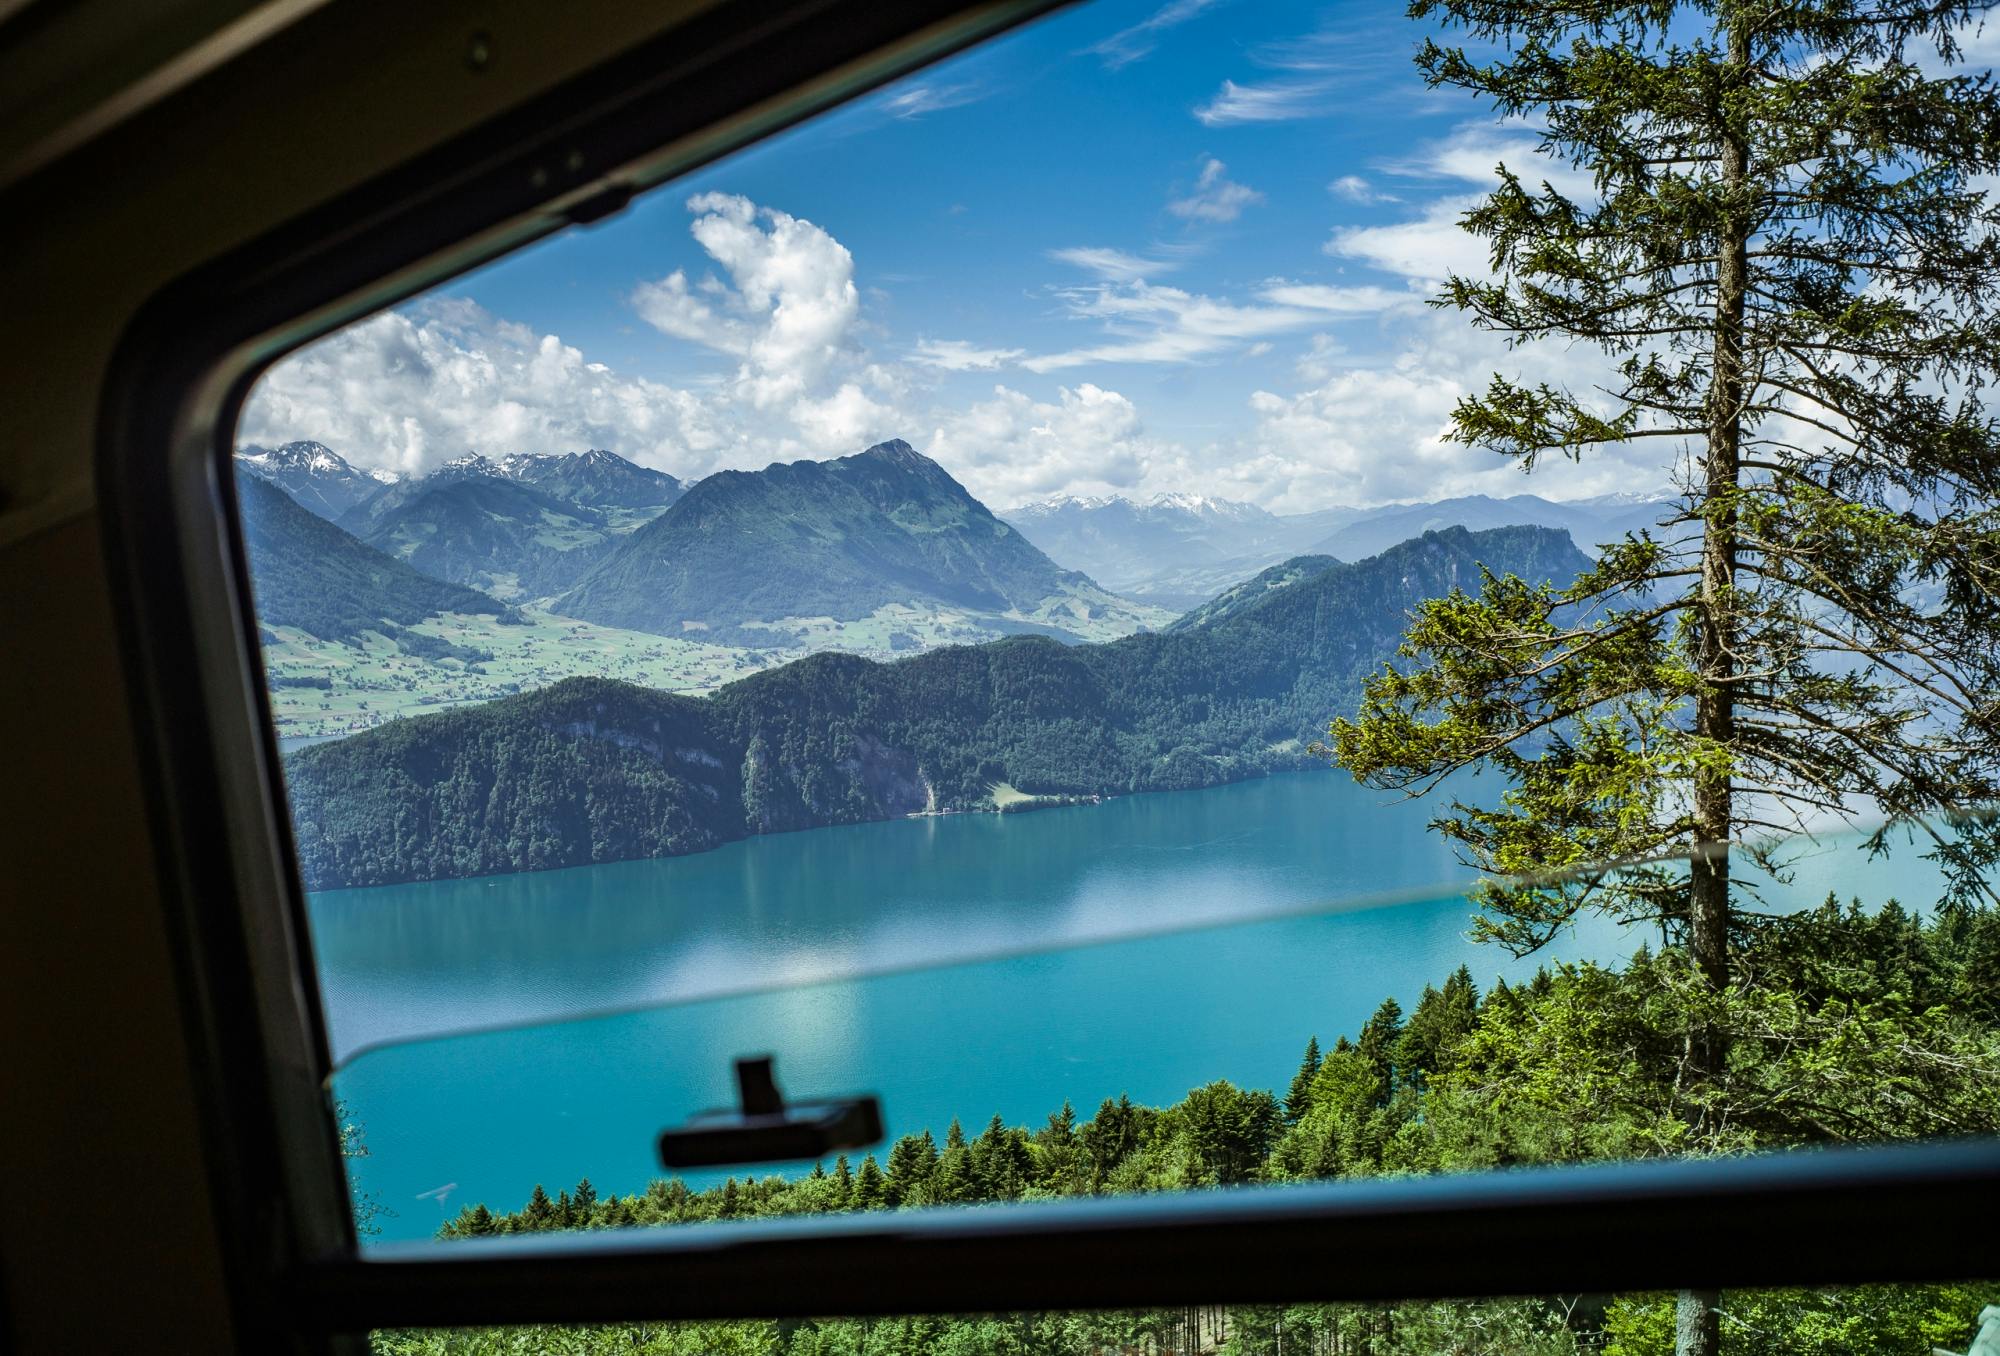 Classic Rigi round trip from Lucerne with boat tour